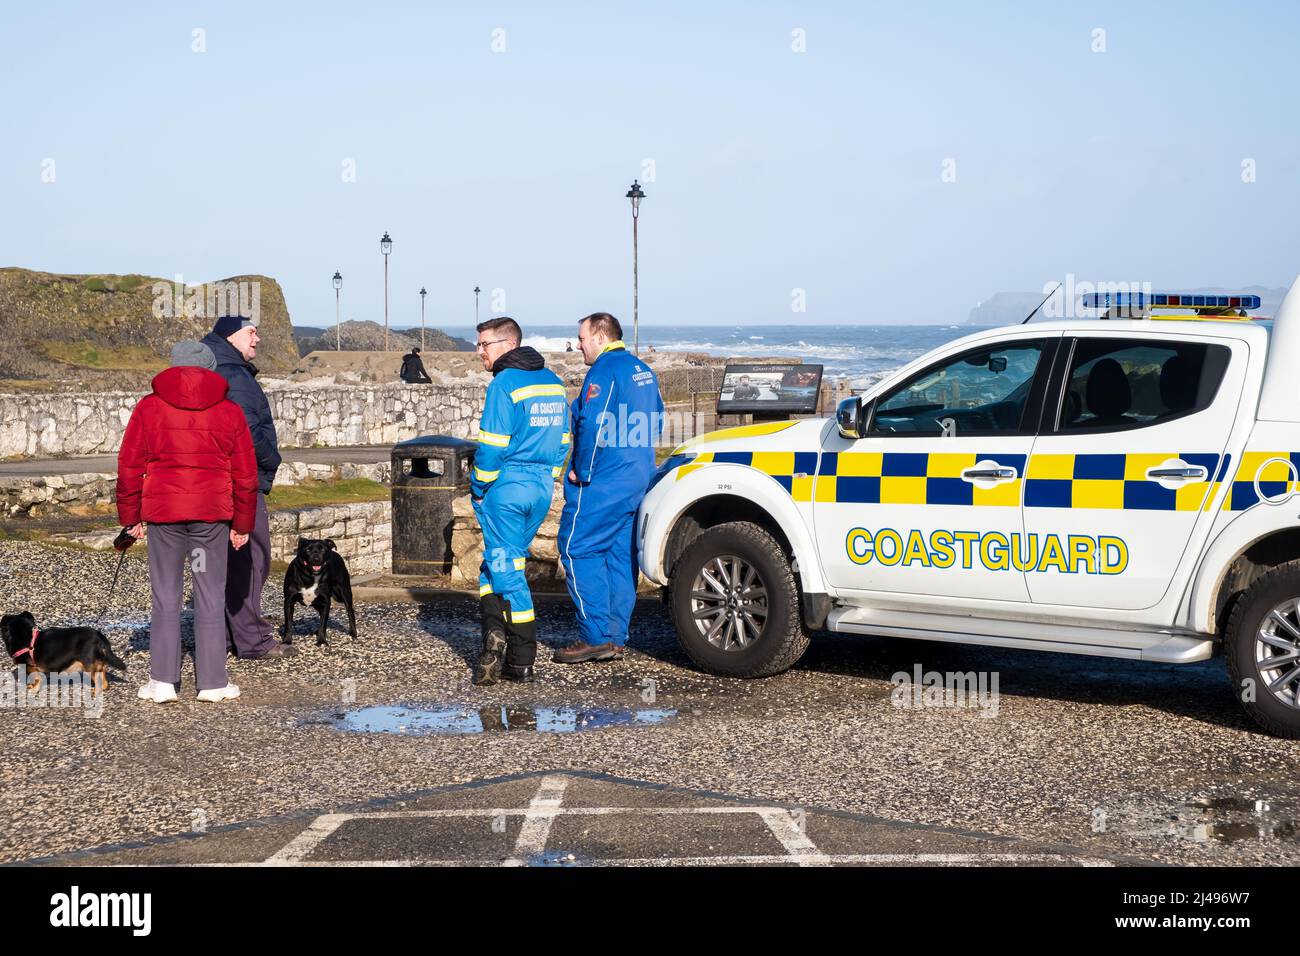 Members of the Search and Rescue Coastguard team keeping watch during a stormy day at Ballintoy Harbour in Co. Antrim, Northern Ireland. Stock Photo